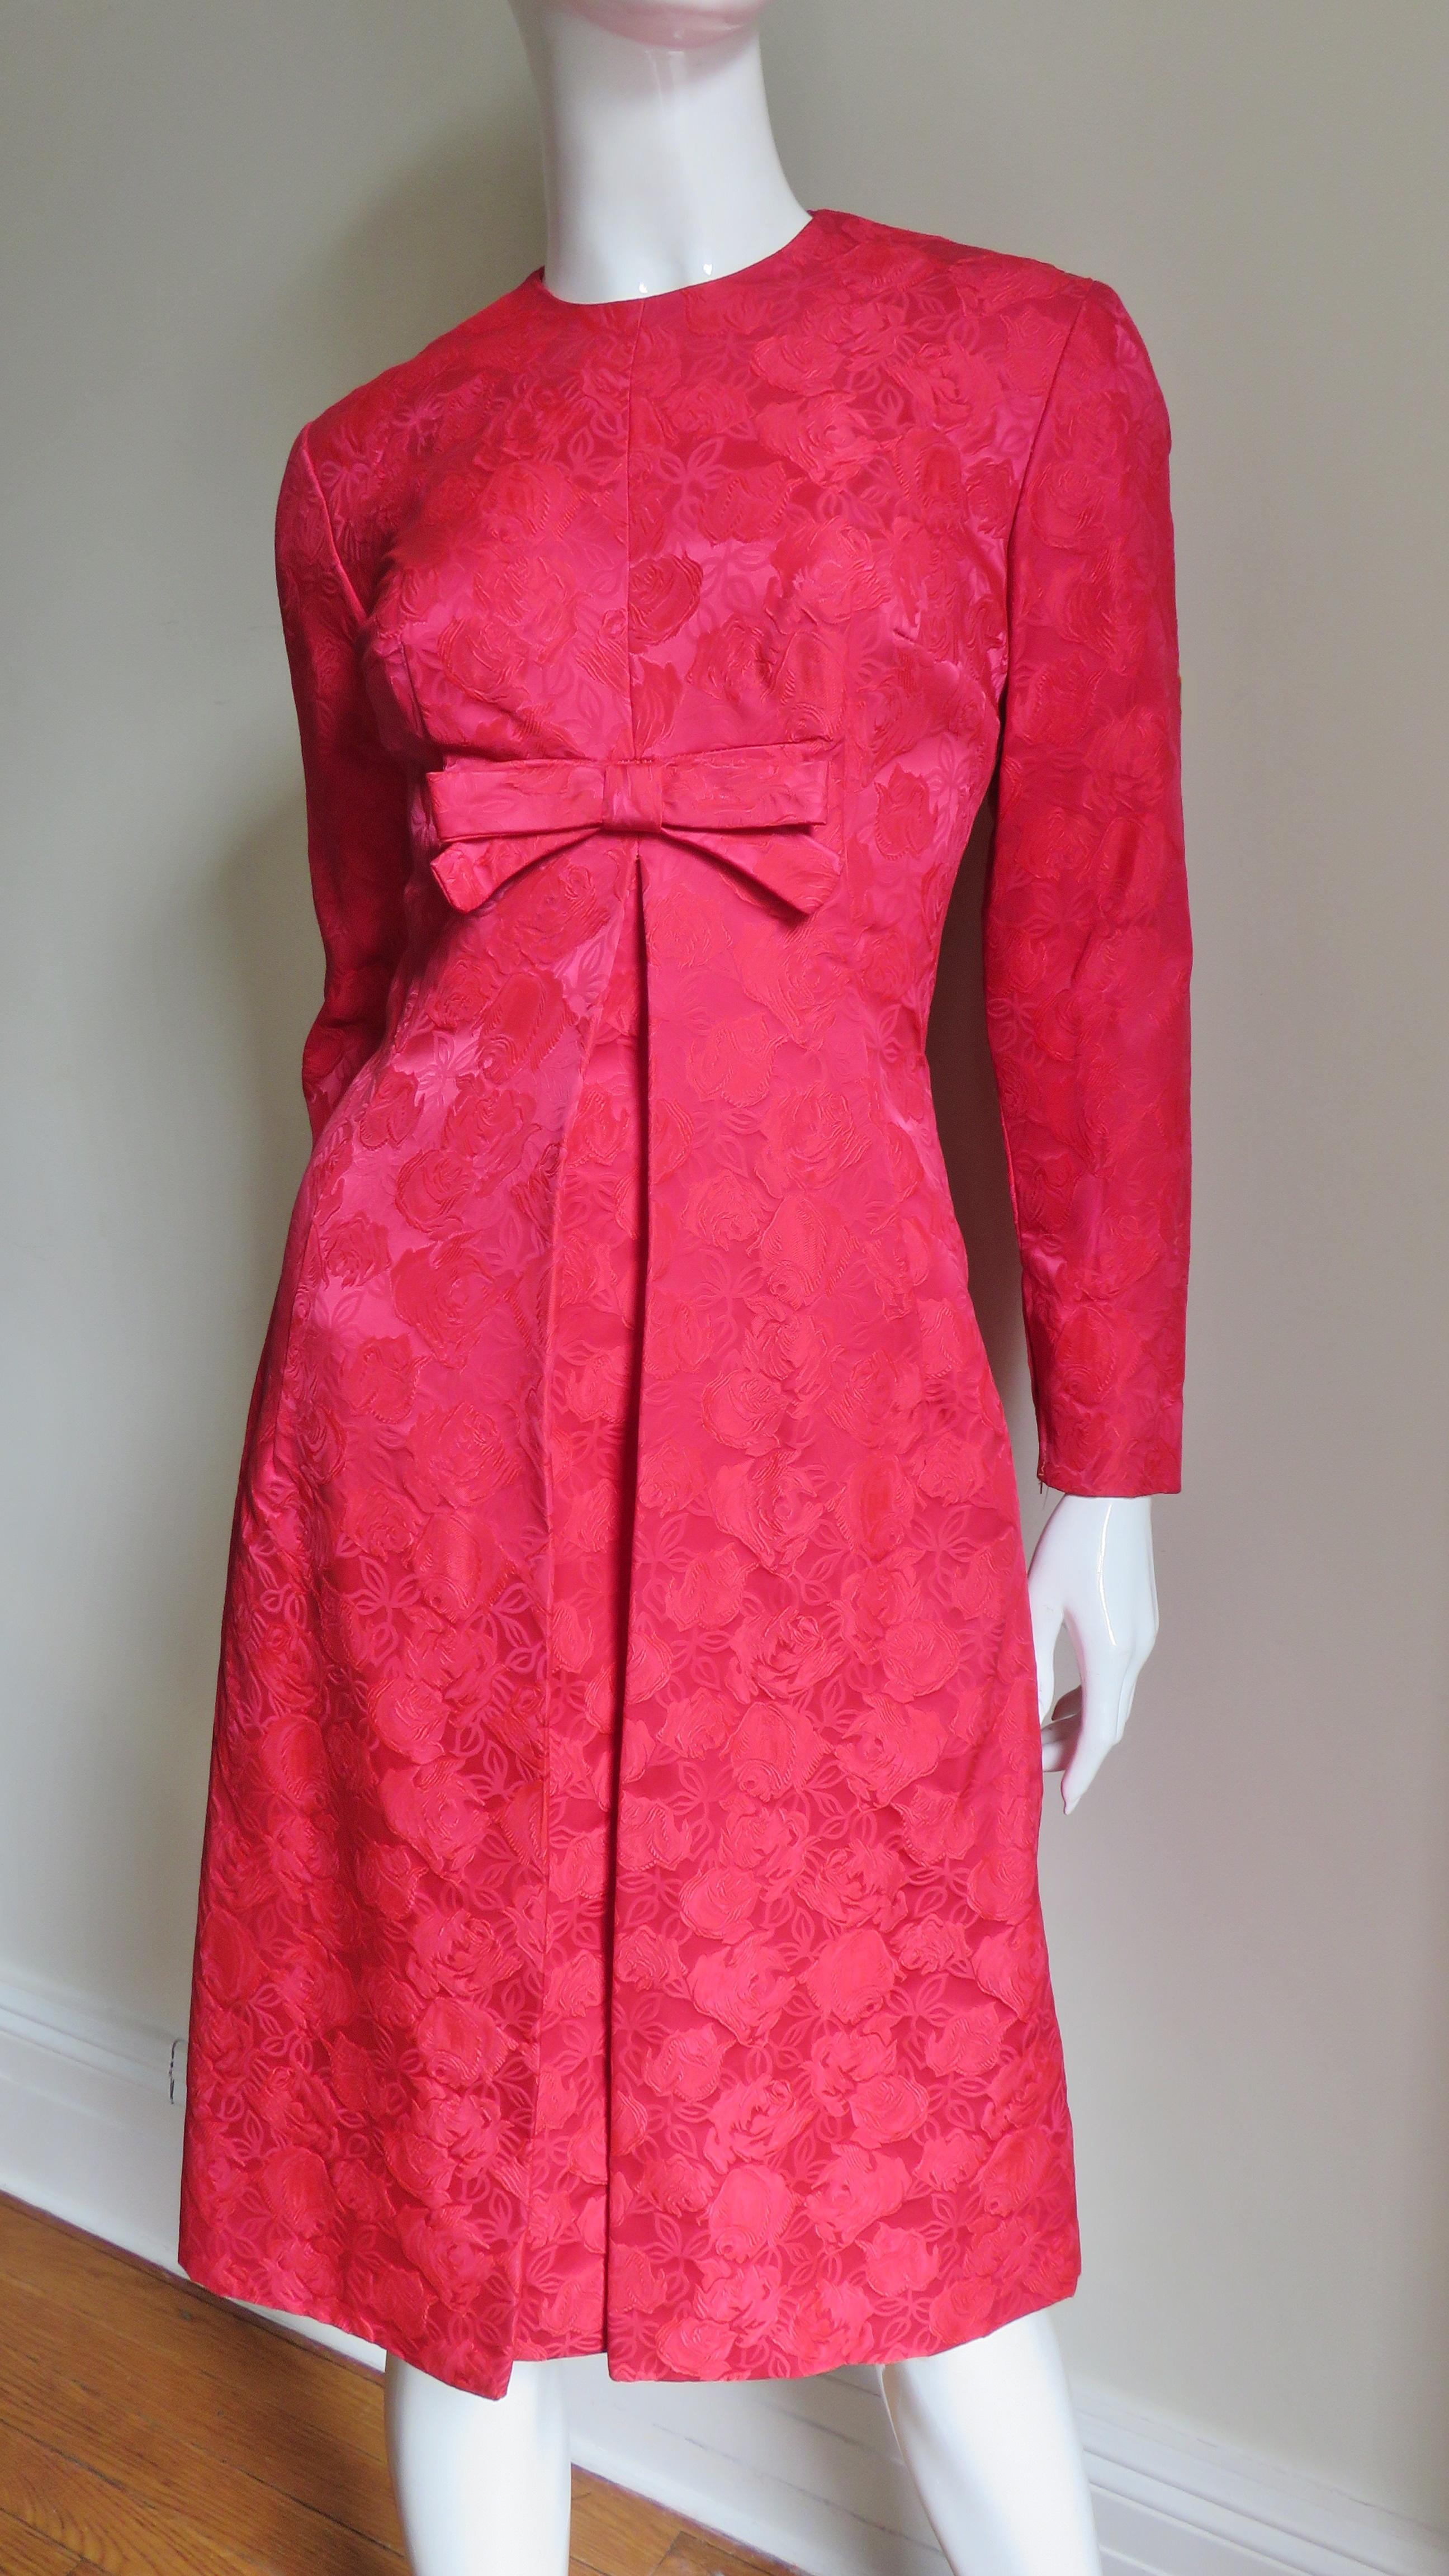 Women's Suzy Perette New Damask Dress and Overdress 1950s